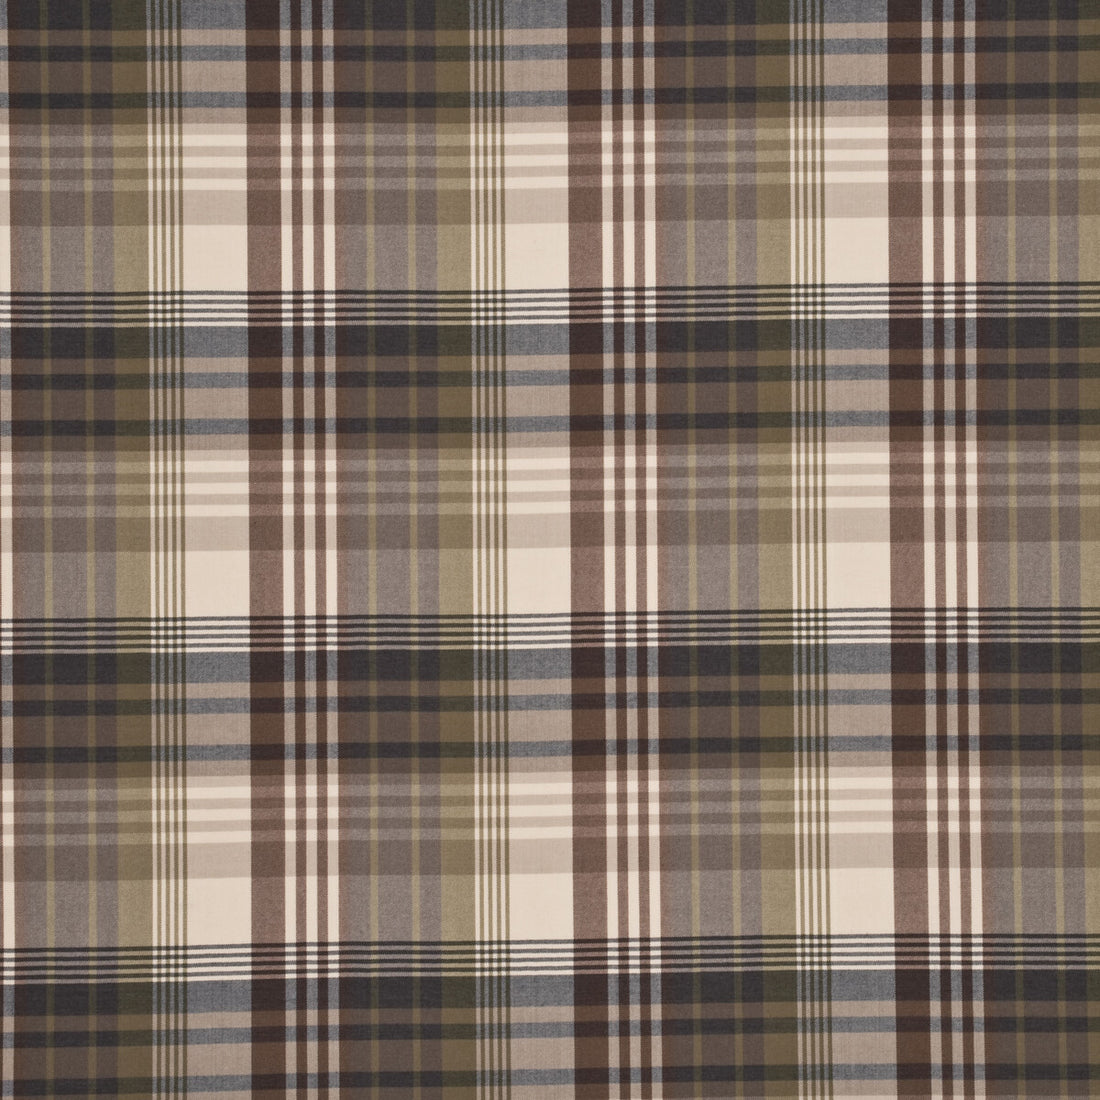 Ancient Tartan fabric in charcoal/gold color - pattern FD016/584.A127.0 - by Mulberry in the Grand Tour collection